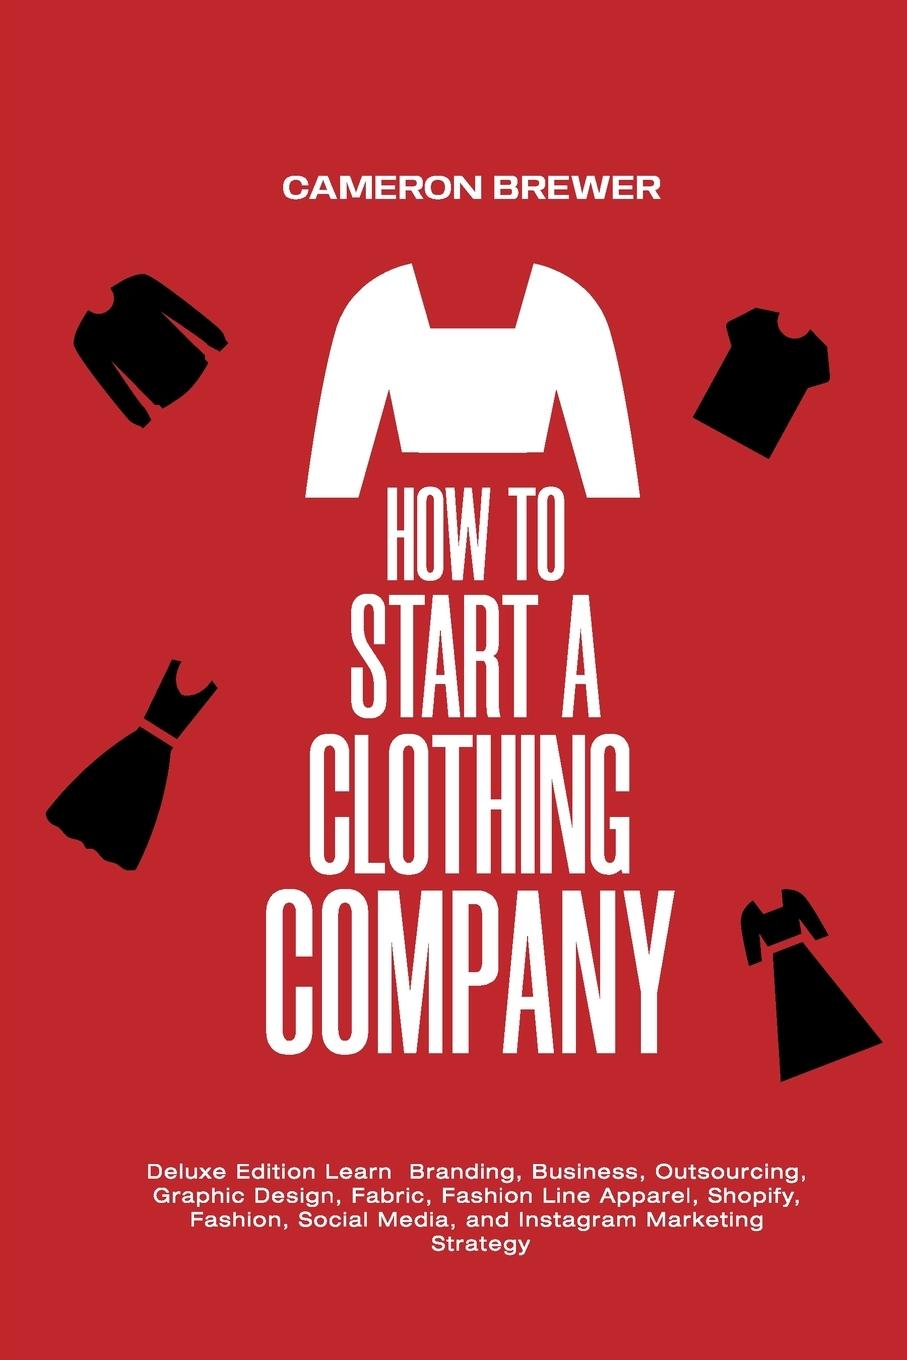 Книга How to Start a Clothing Company - Deluxe Edition Learn Branding, Business, Outsourcing, Graphic Design, Fabric, Fashion Line Apparel, Shopify, Fashion CAMERON BREWER